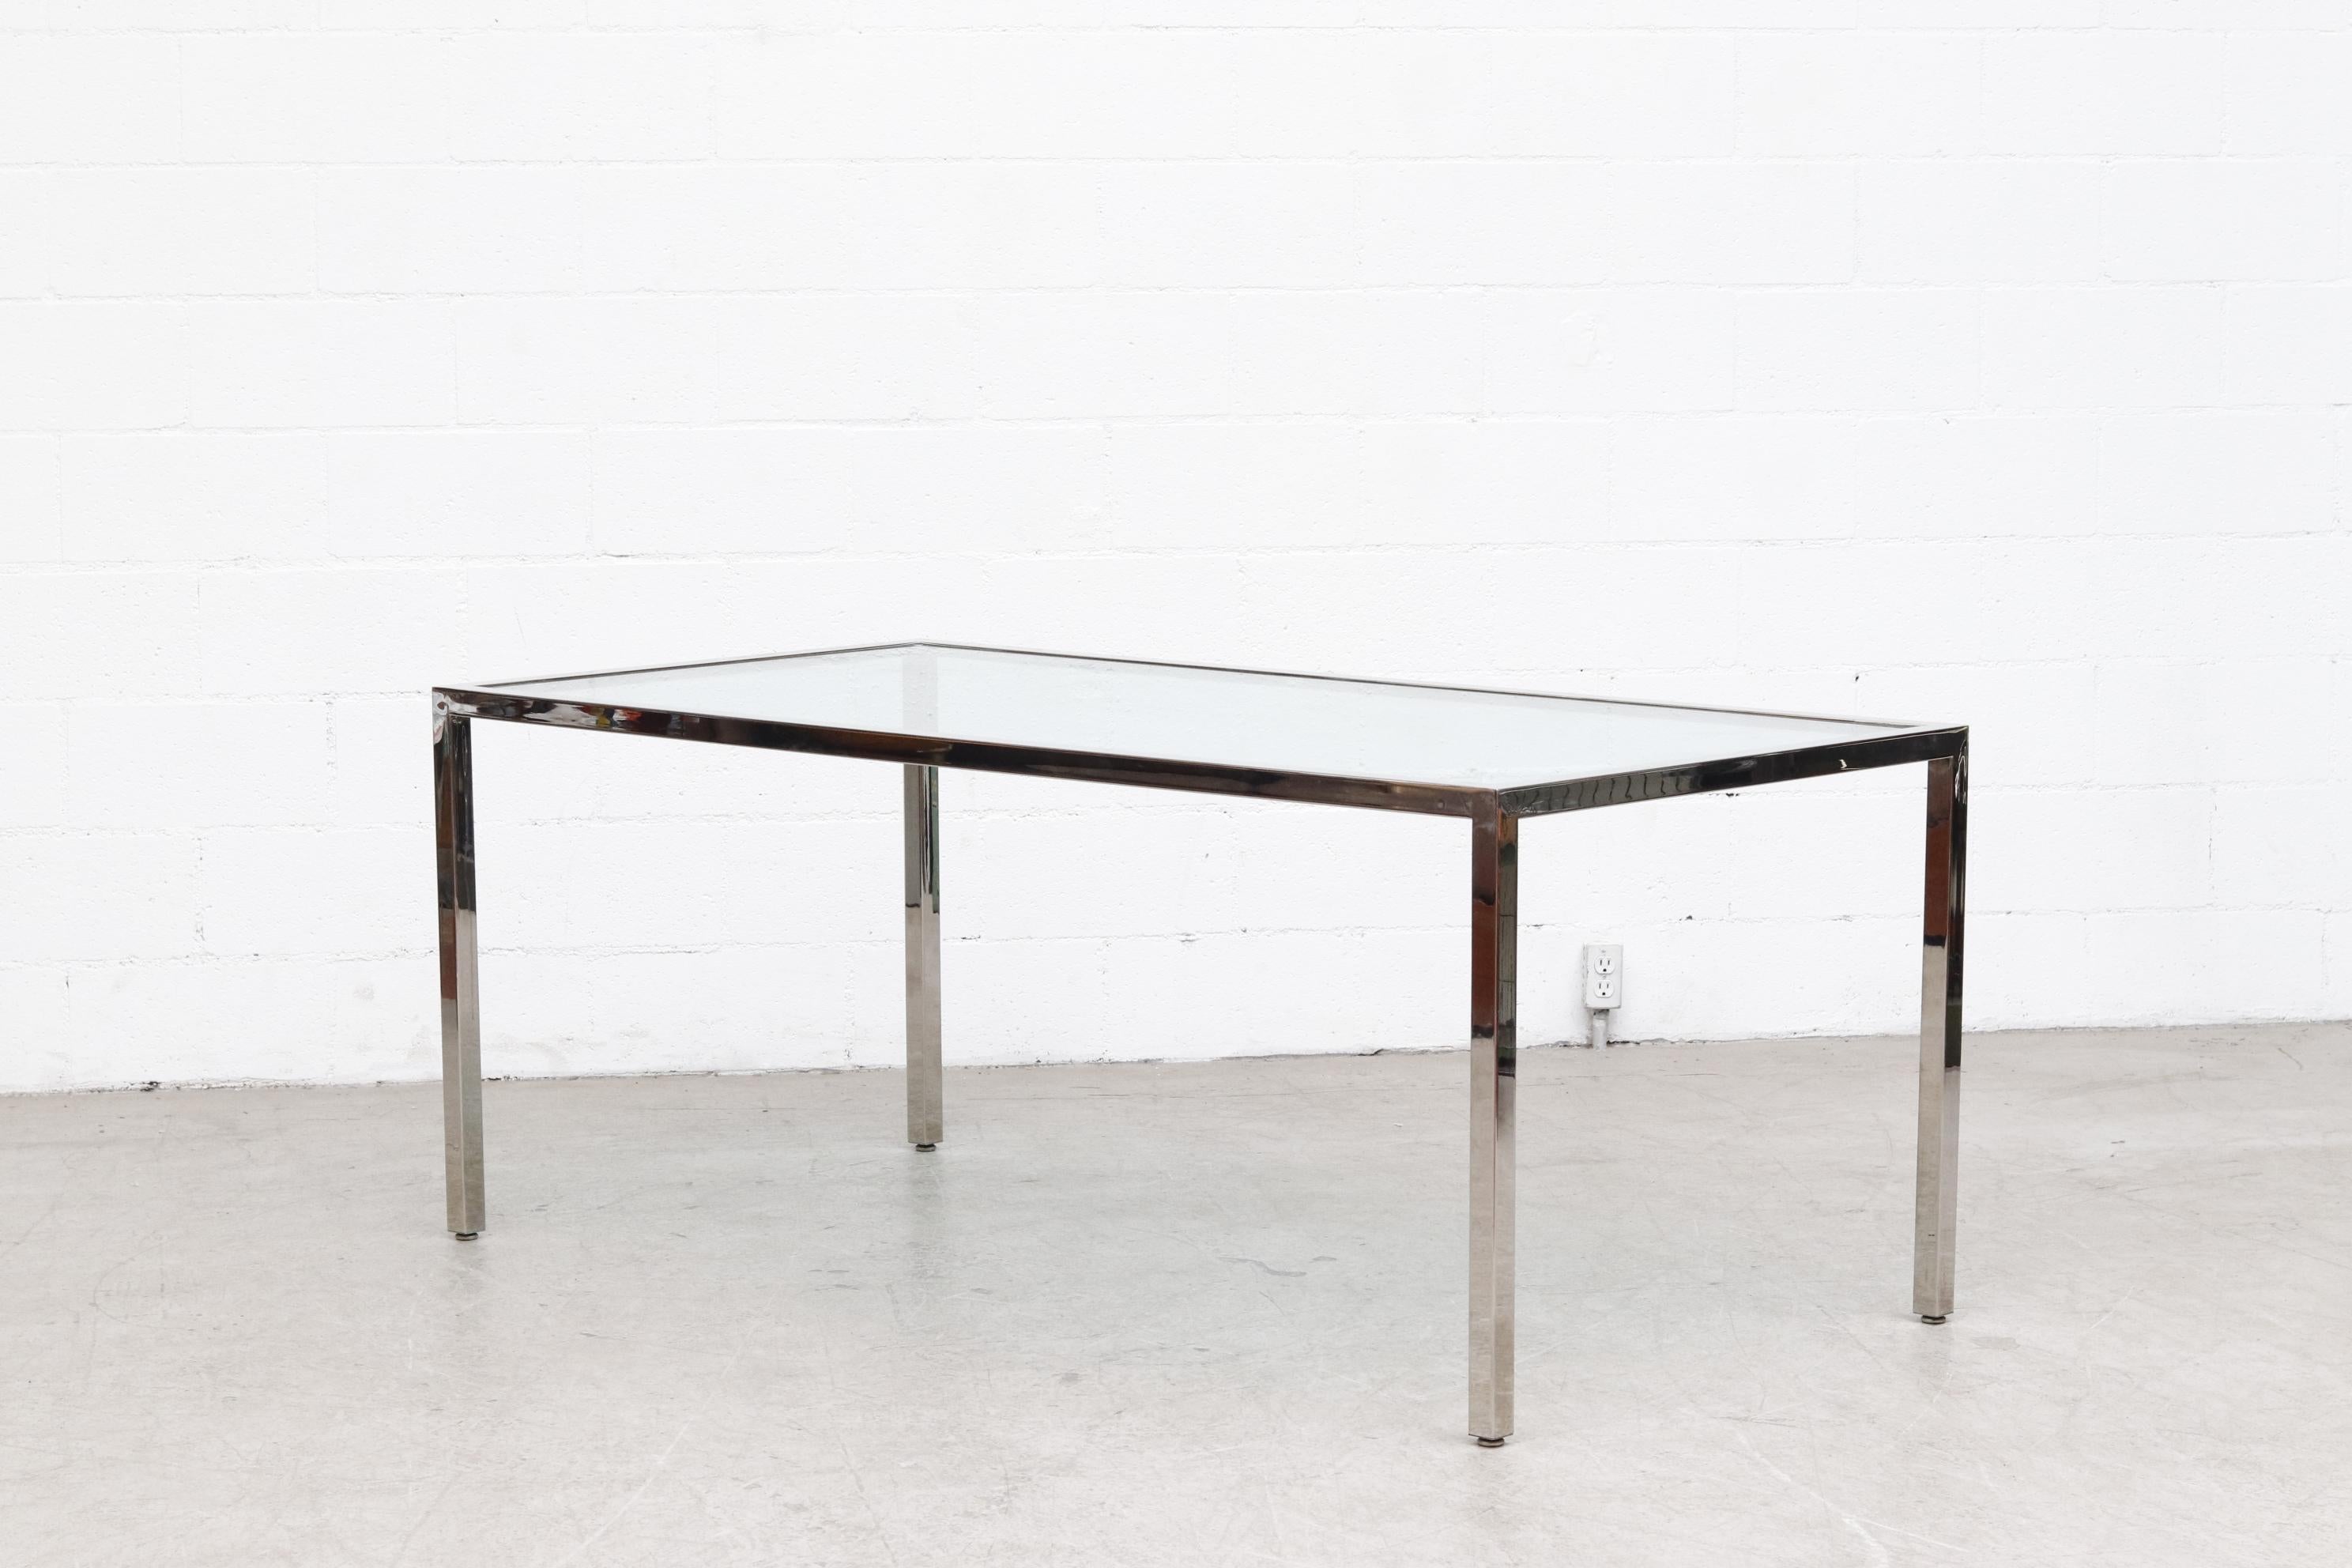 MOD and stylish heavy chrome dining table with inset glass. In good original condition with normal wear. Visible scratches to glass and chrome, consistent with it's age and use.